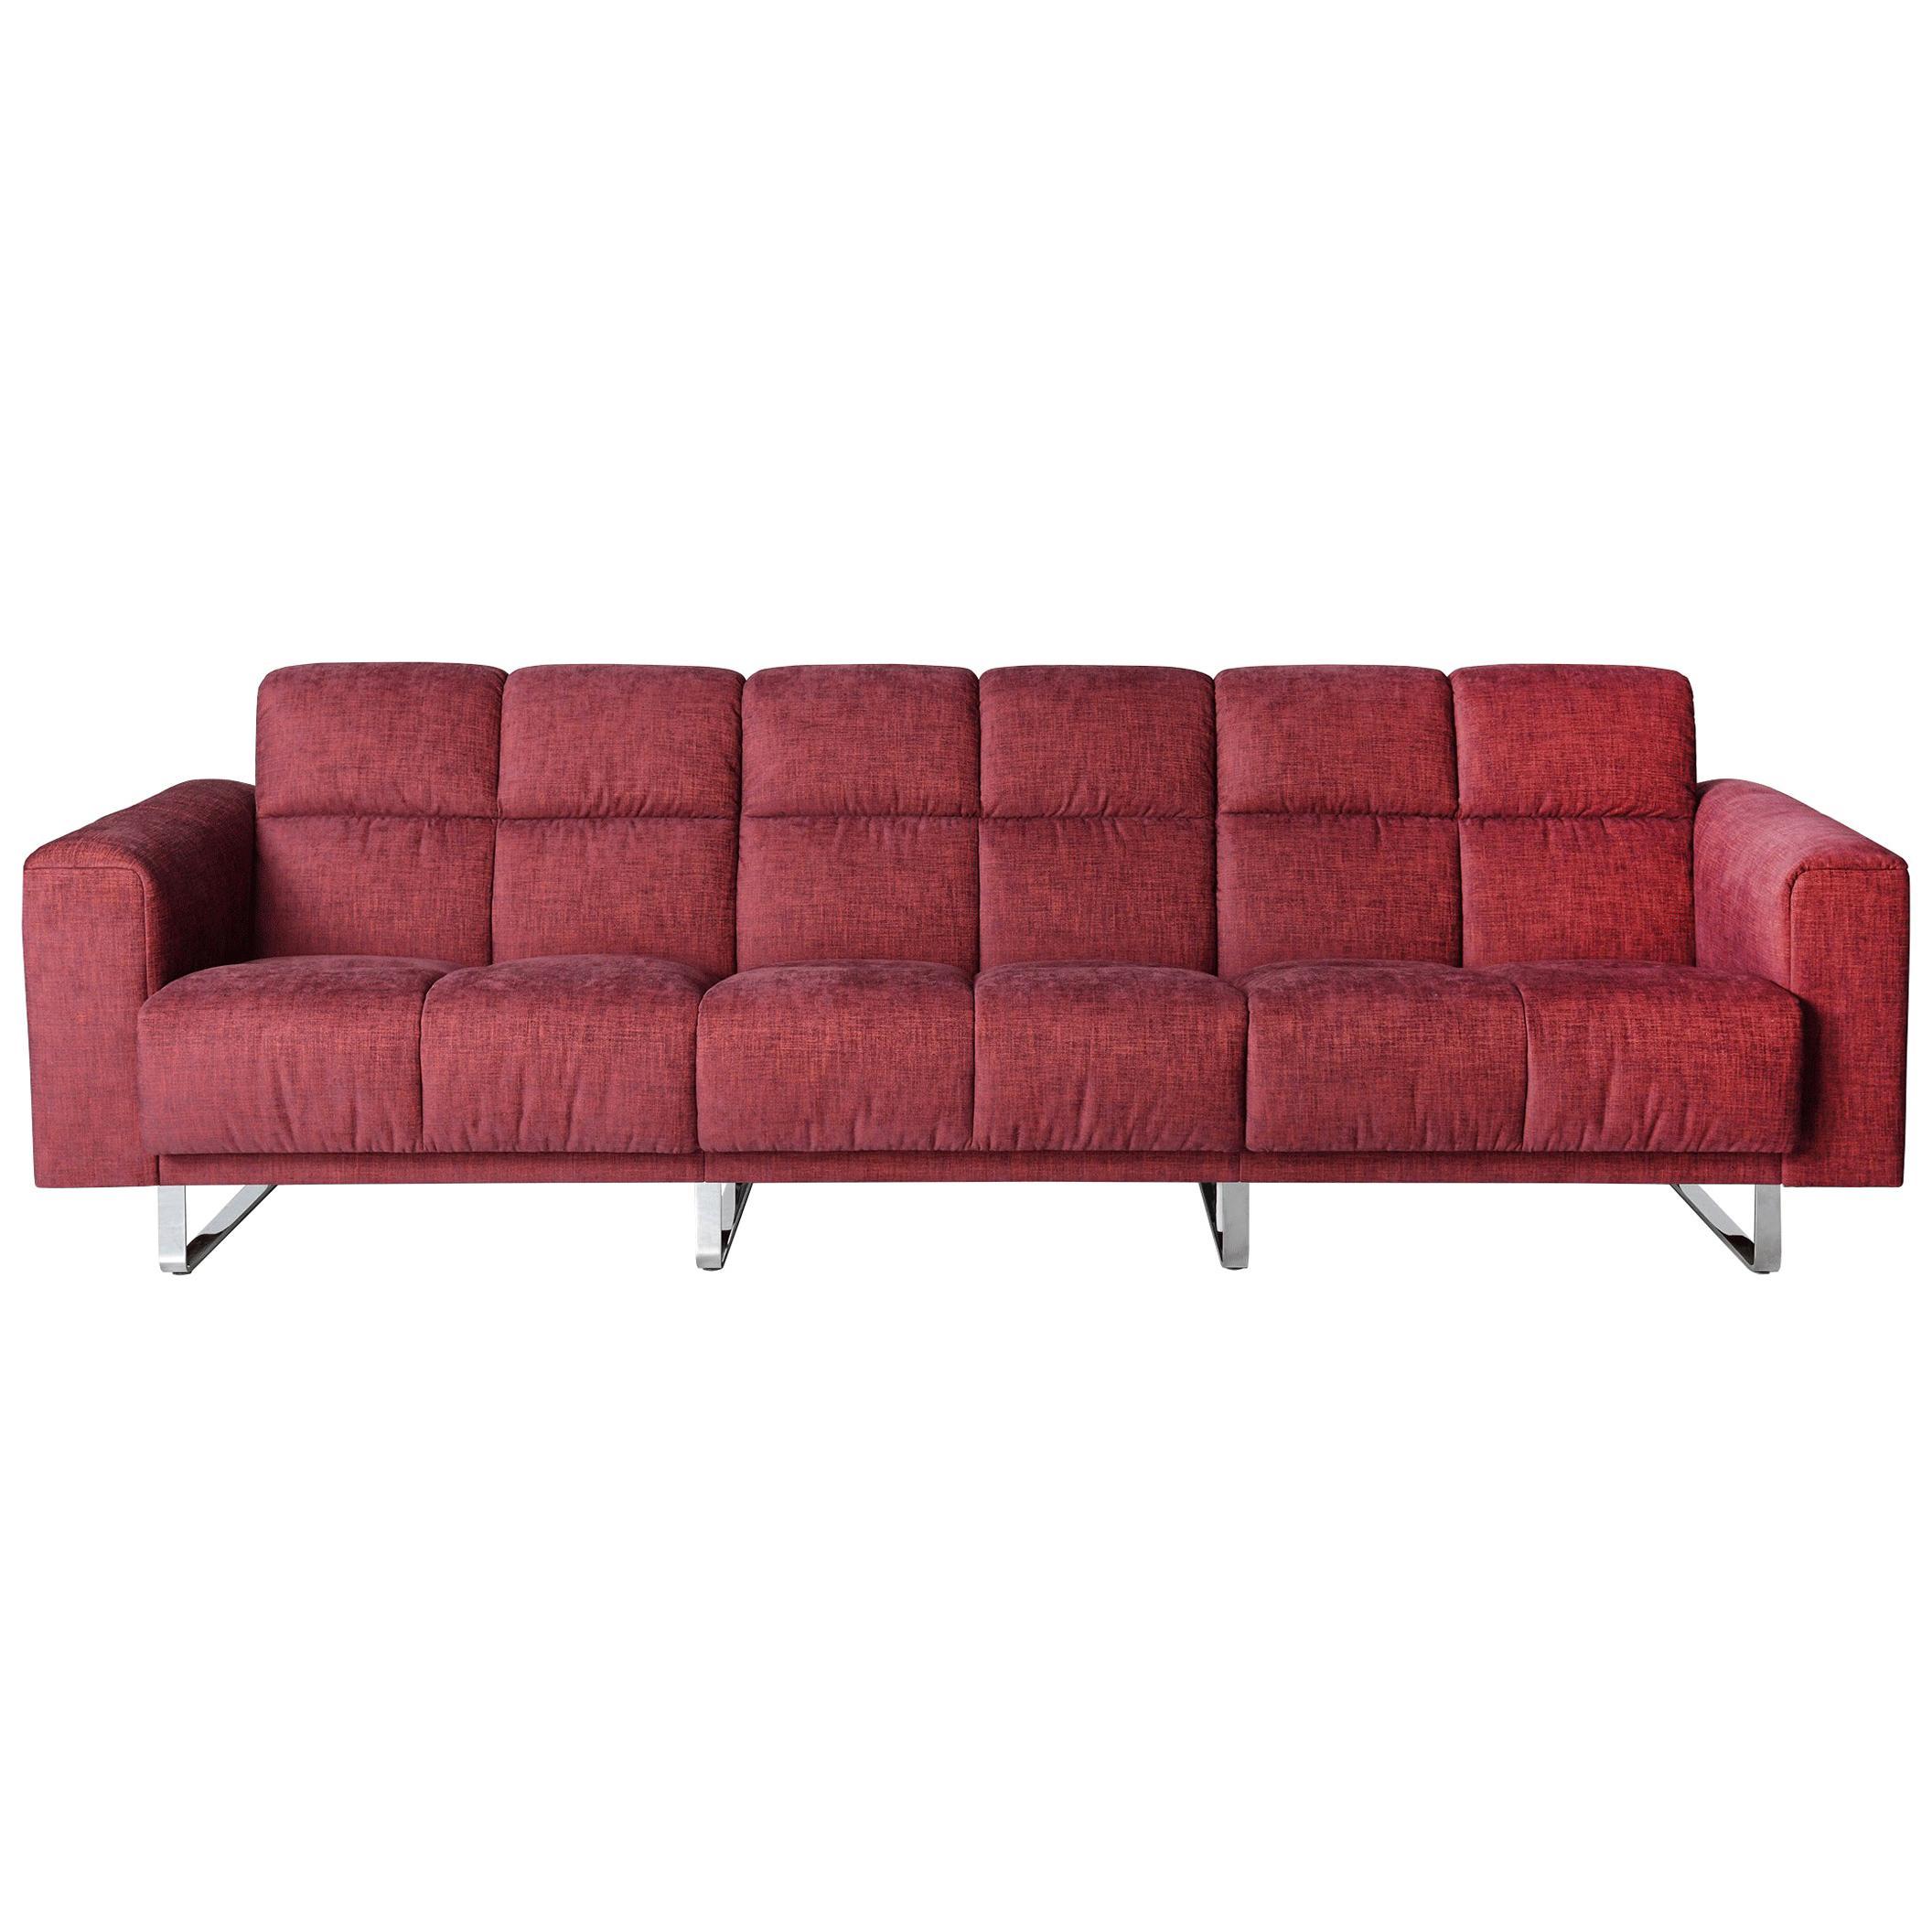 De Sede DS 580 Three-Seat Sofa in Red Upholstery by De Sede Design-Team For Sale